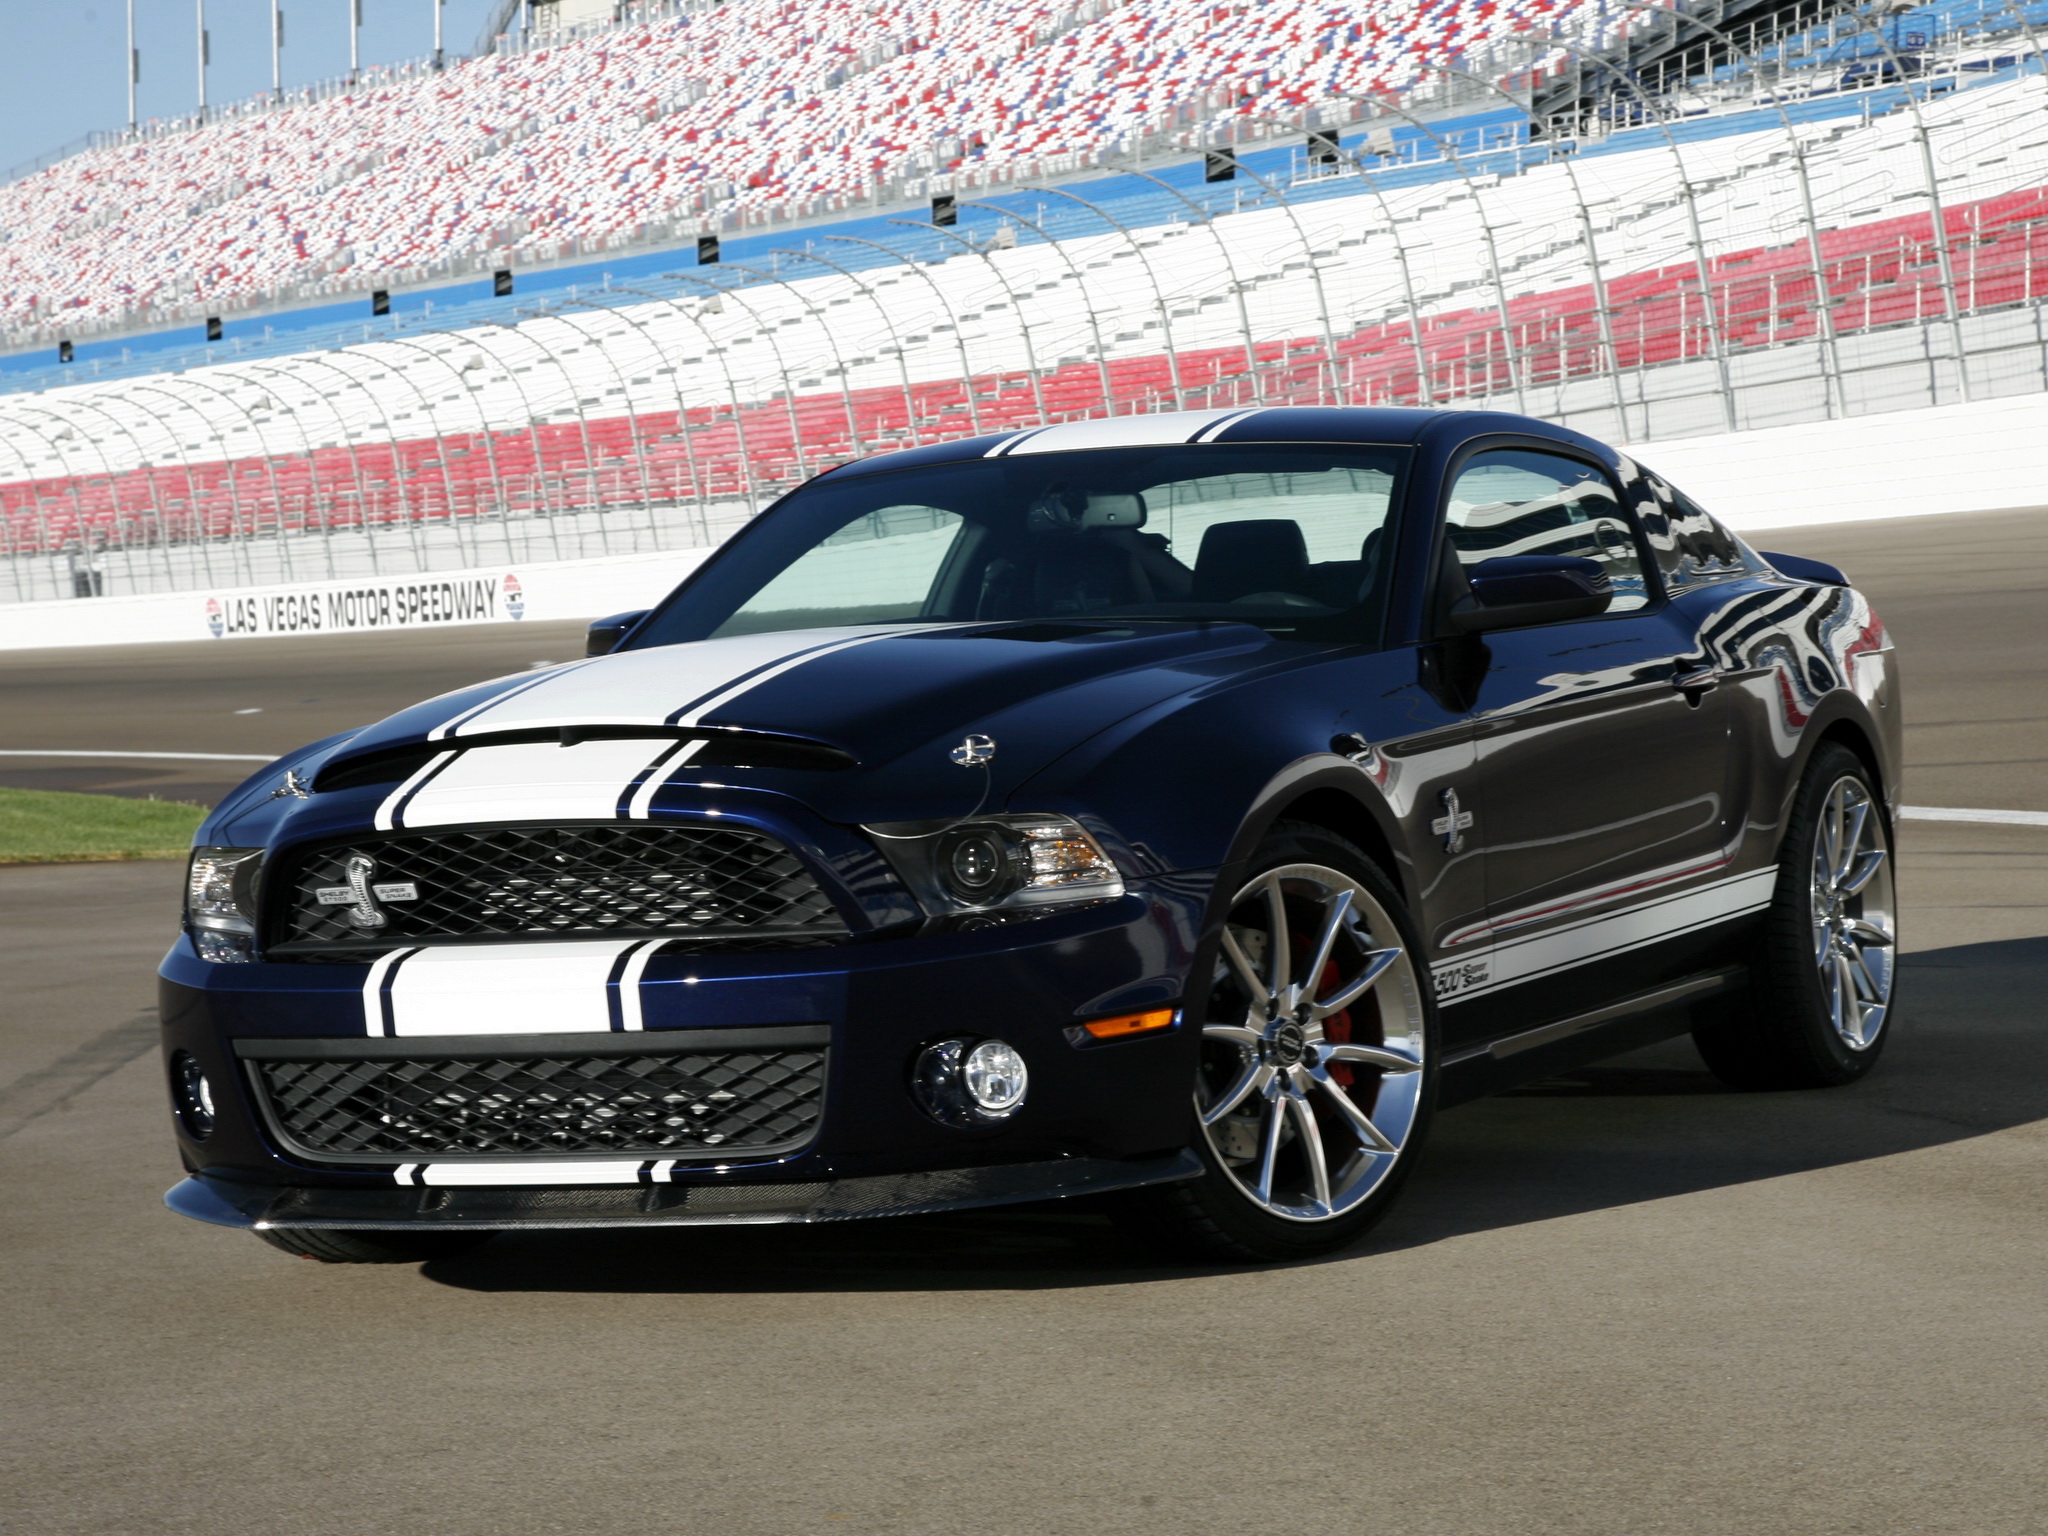 2010, Shelby, Gt500, Super snake, Ford, Mustang, Muscle Wallpaper